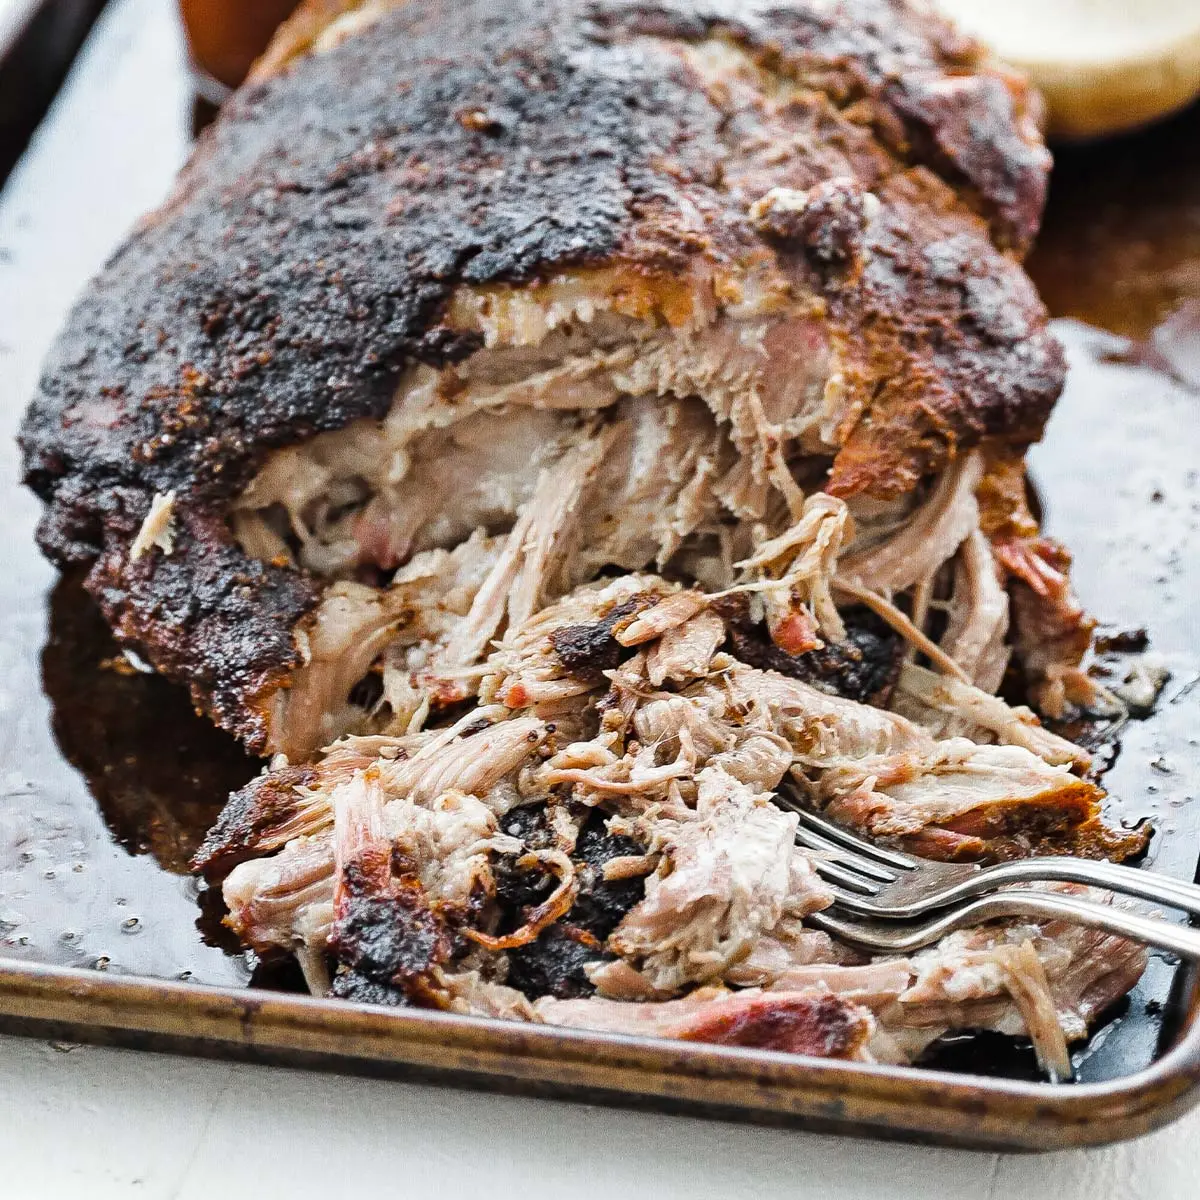 smoked pork for pulled pork - What is the best piece of pork to smoke for pulled pork